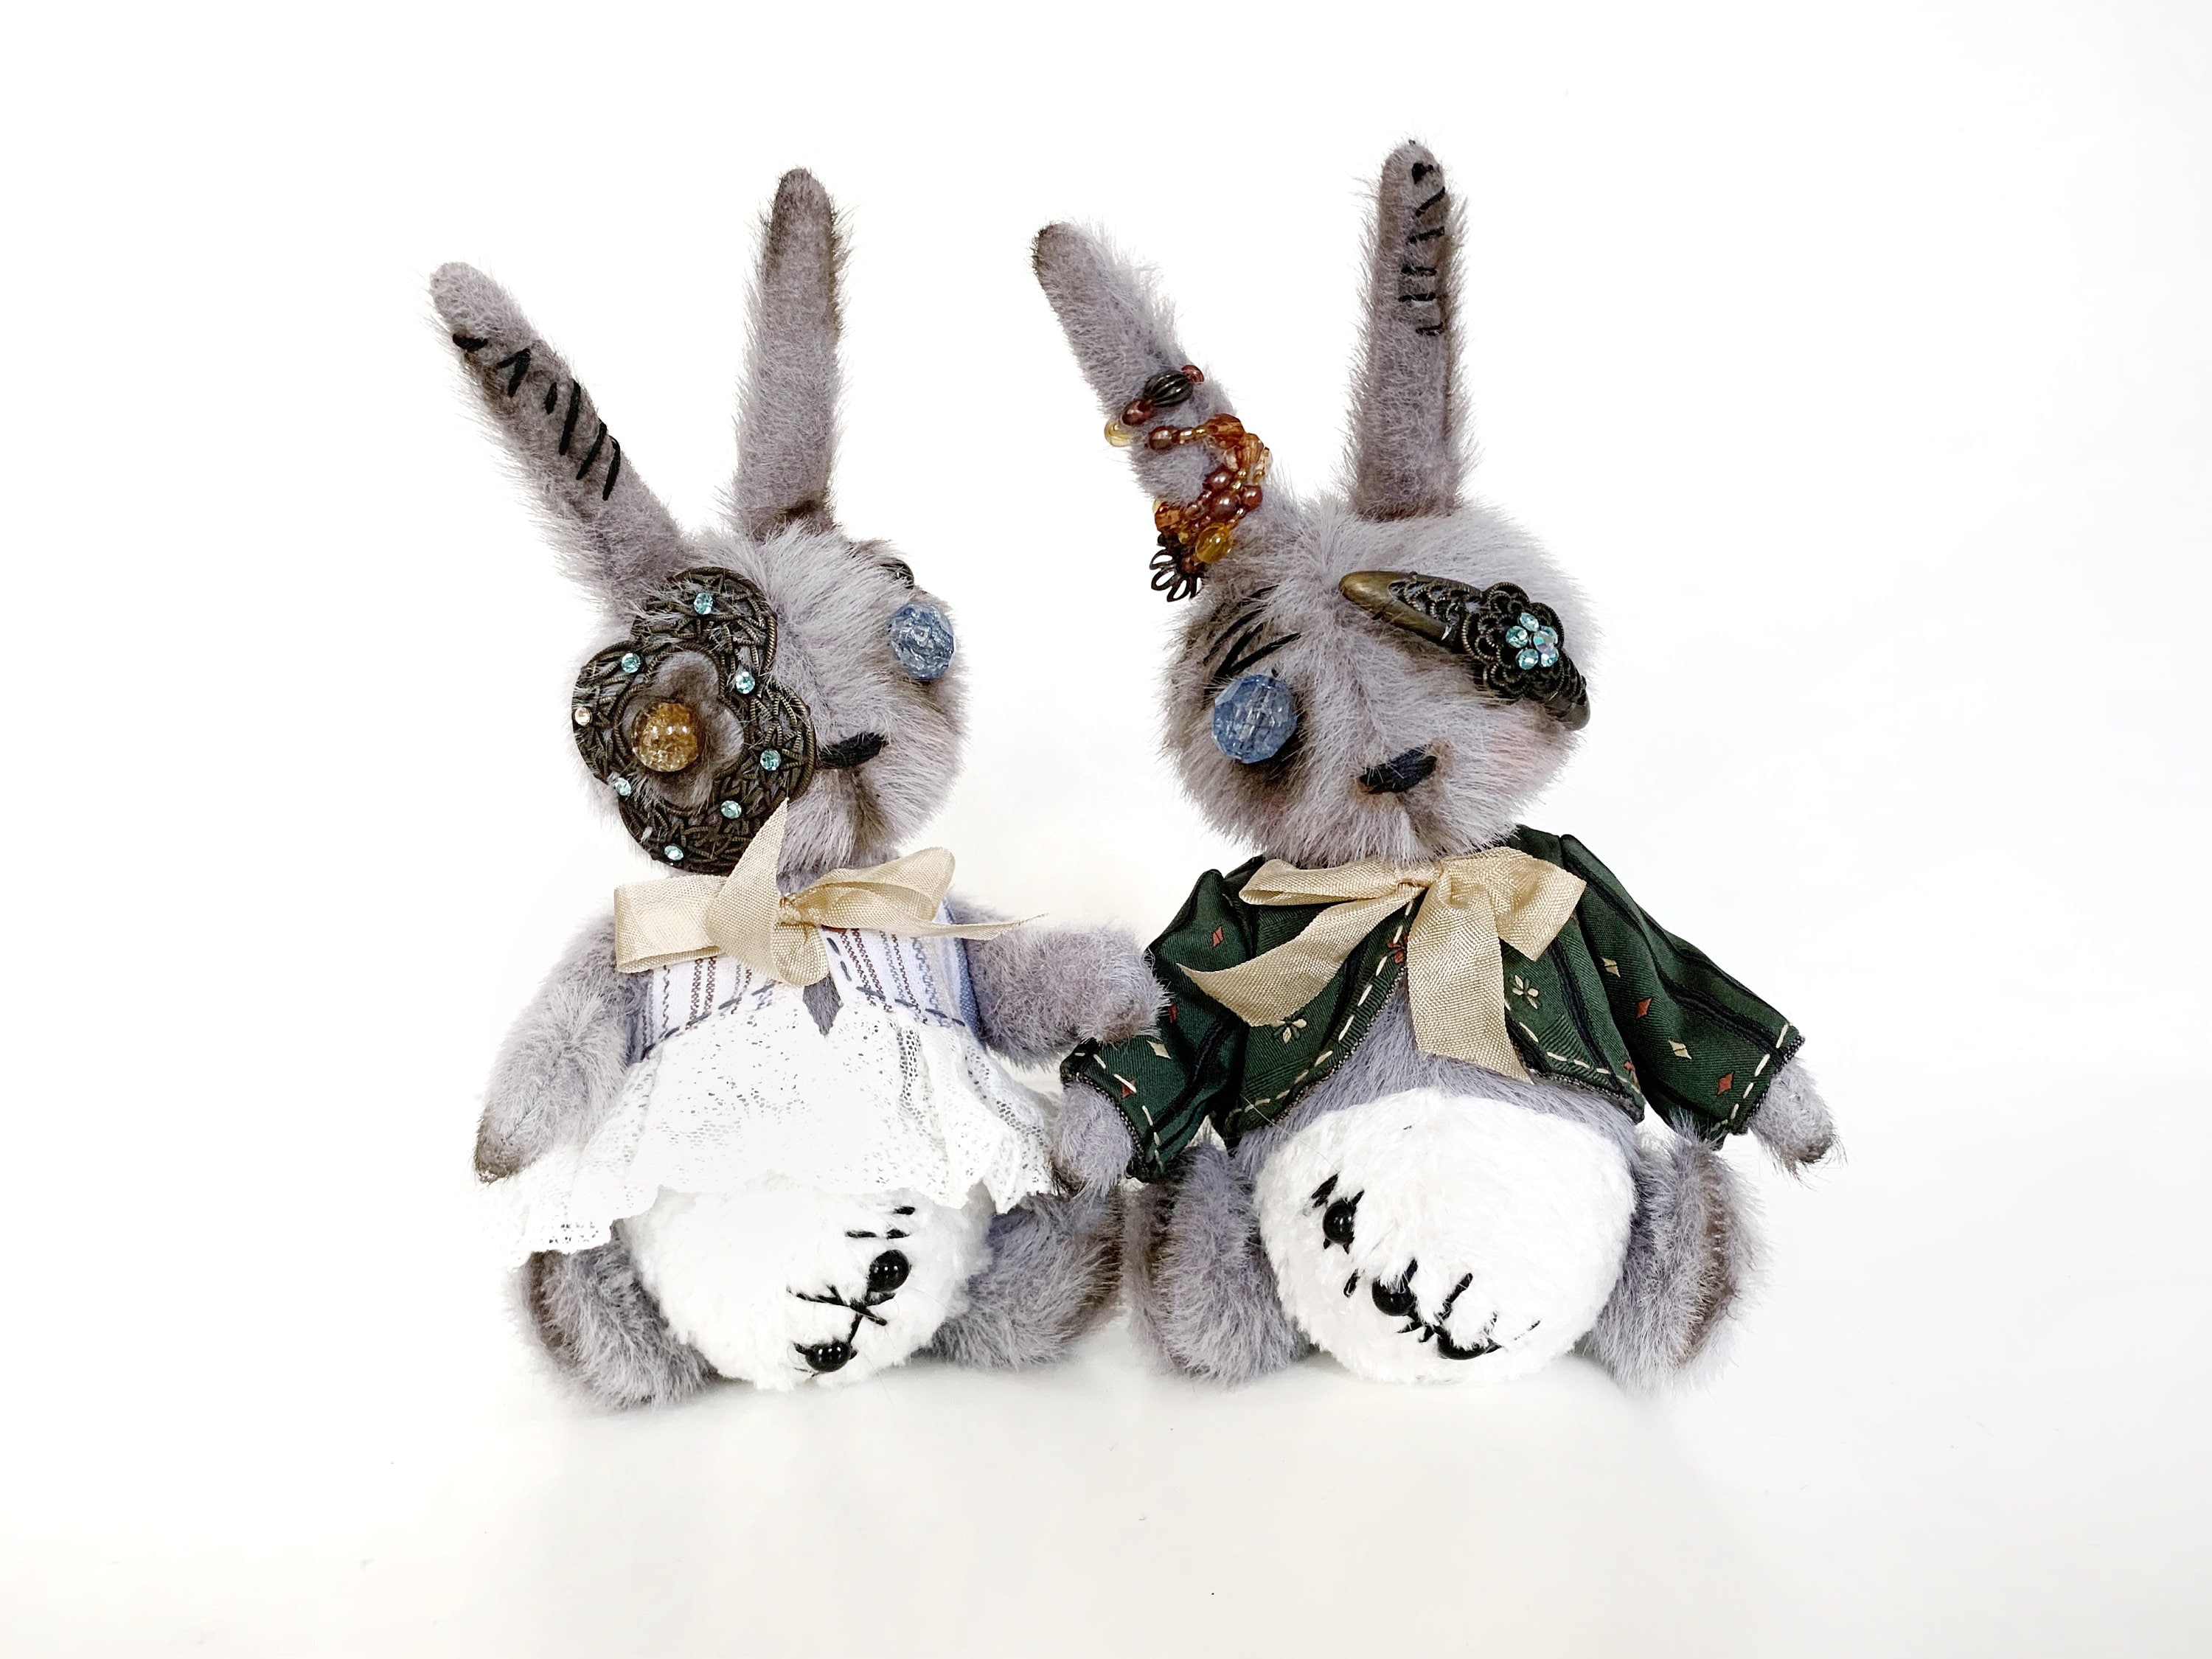 Creepily Cute and Collectible: Zombie Bunny Plush Backpacks